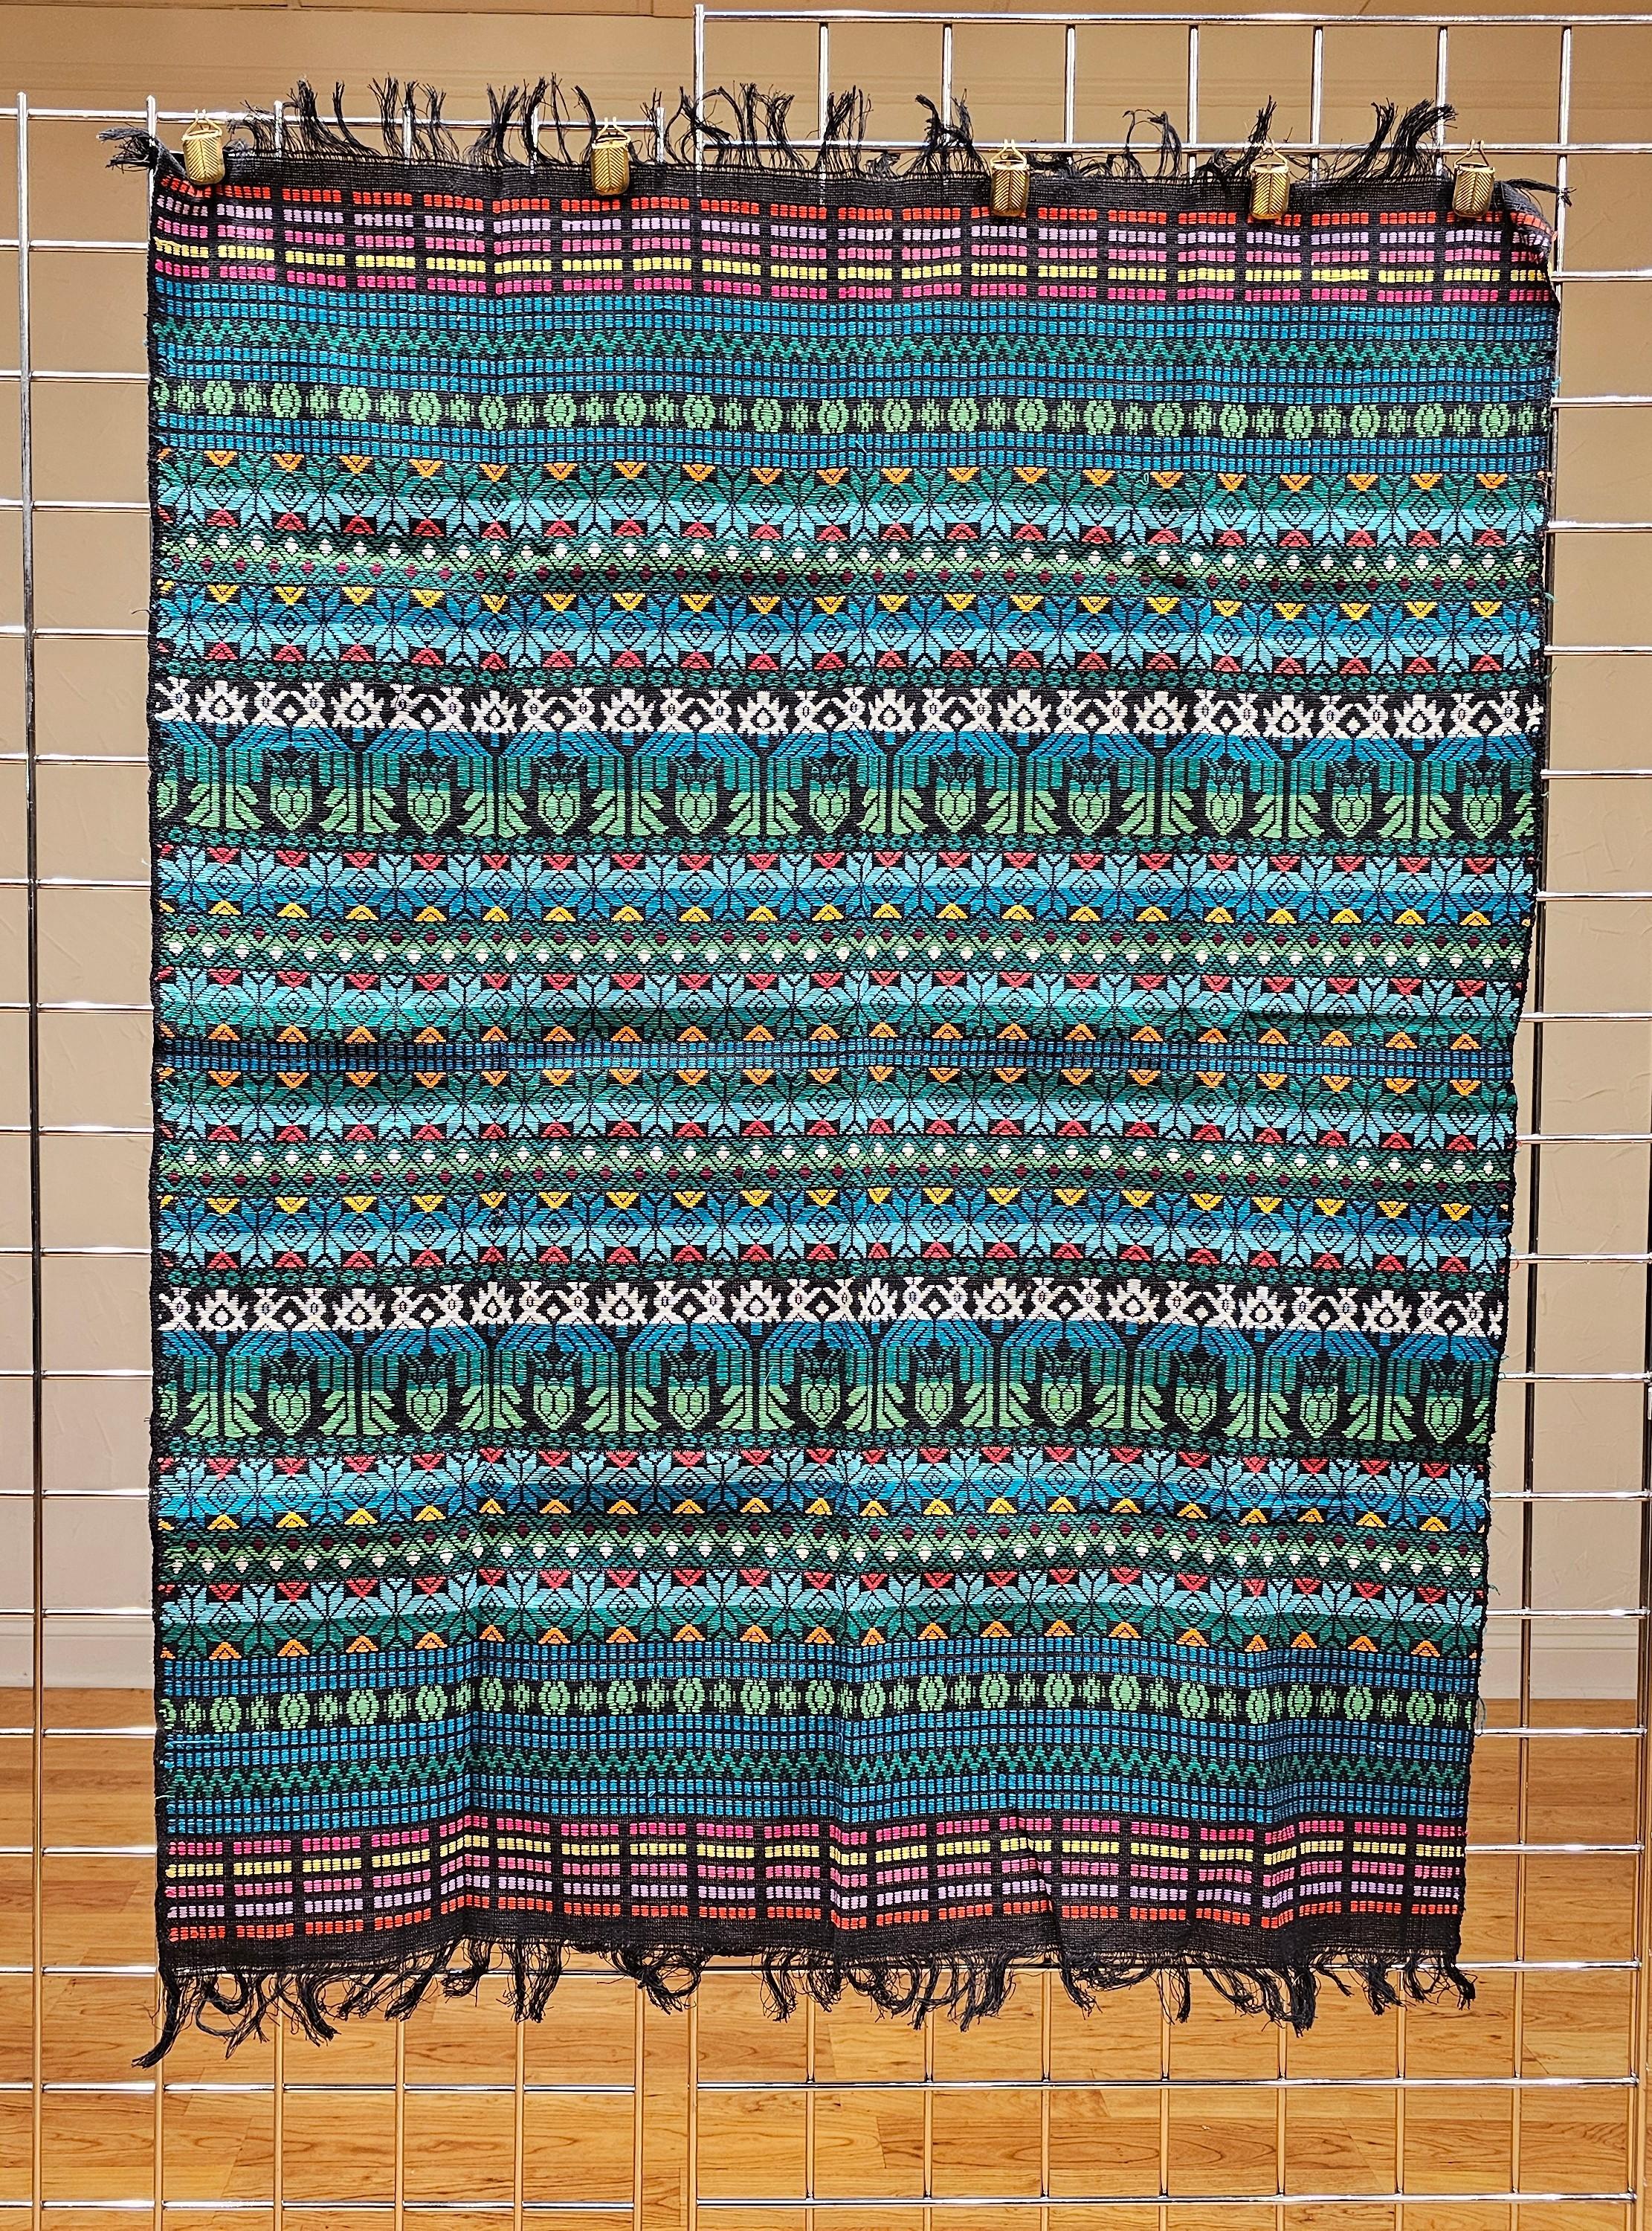 Vintage Hand-Woven South American textile panel in banded stripes pattern with brilliant stripes in colors of Blue, red, green, black, orange and magenta. The textile has an extremely fine weave and a very high quality handspun wool that was hand